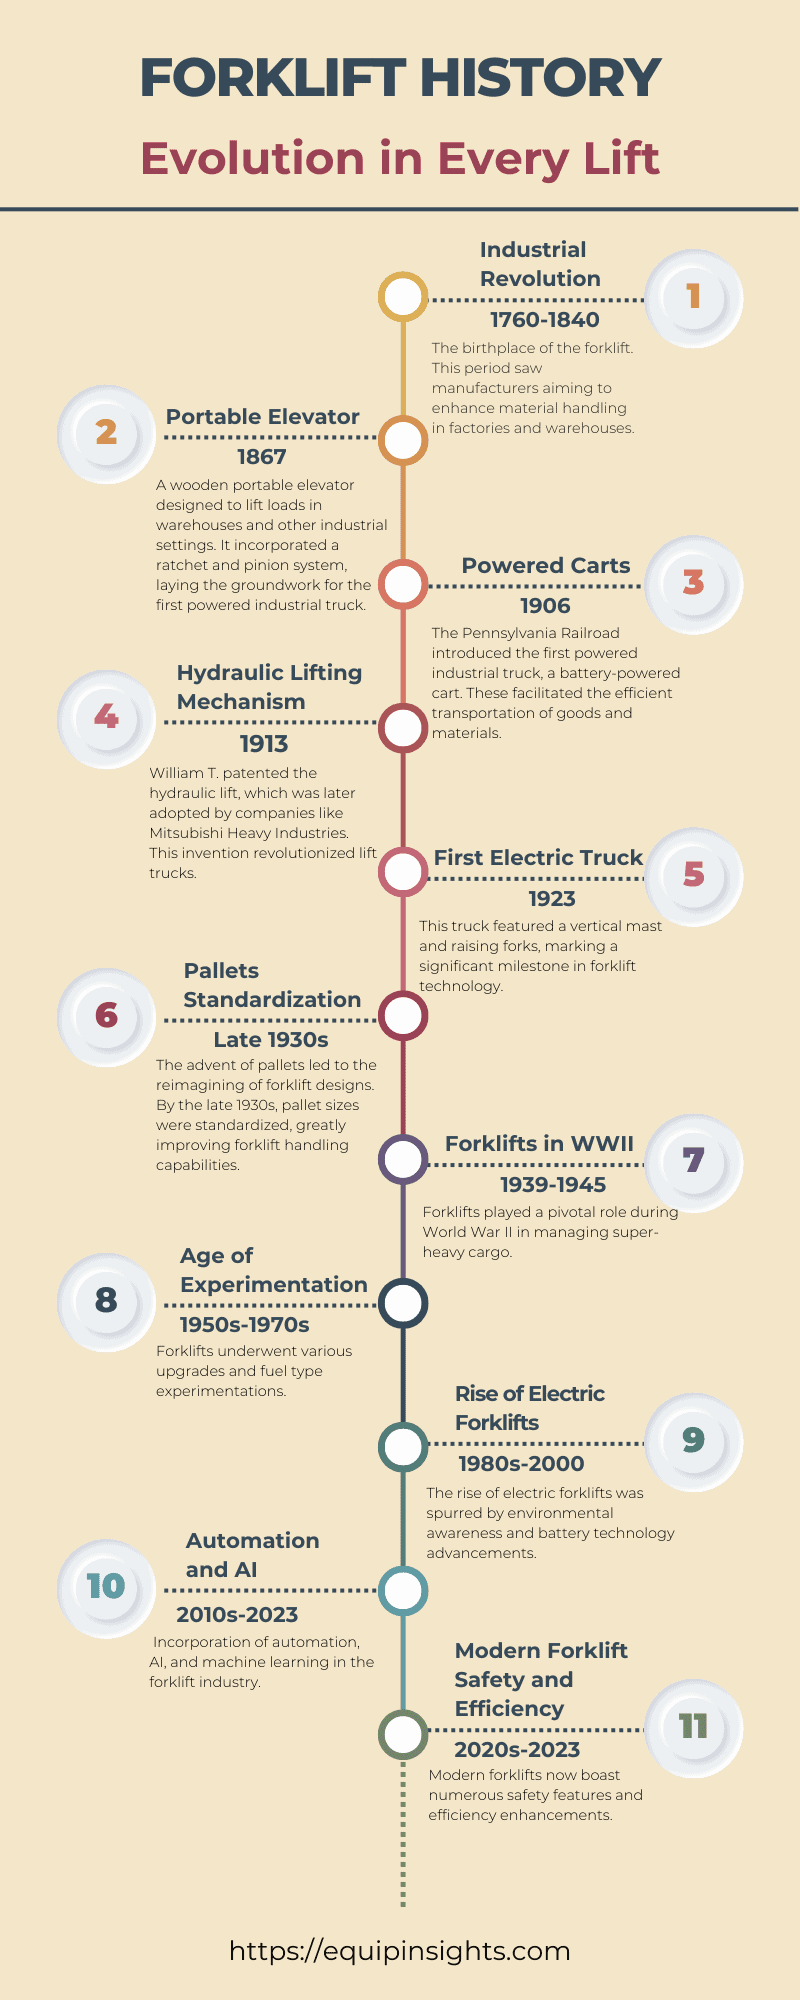 Infographic depicting the evolution of forklifts, from early portable elevators to modern AI innovations, highlighting key milestones and technological advancements.